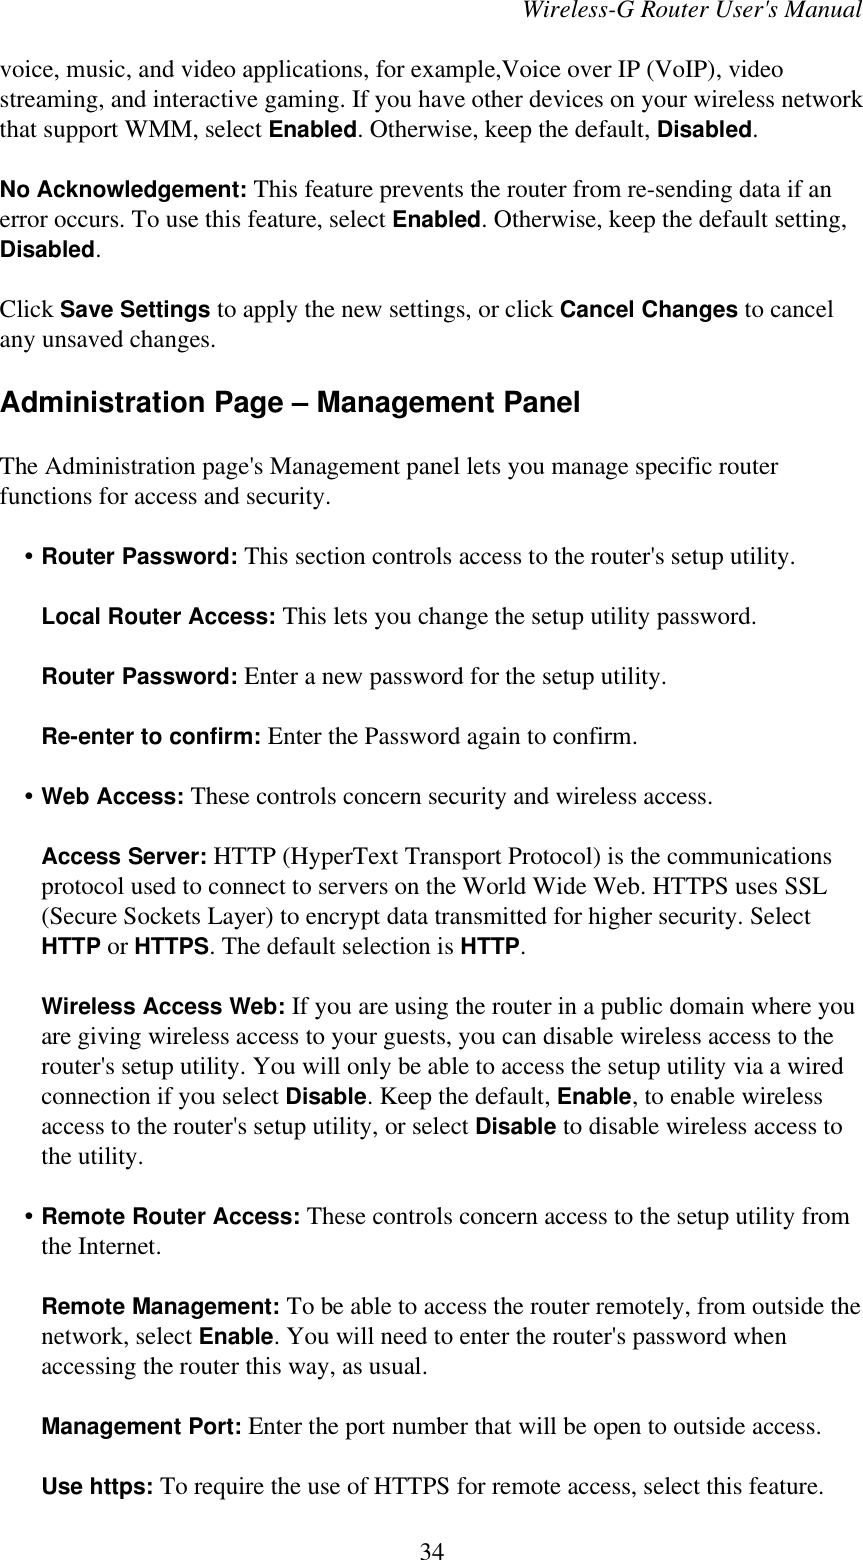 Wireless-G Router User&apos;s Manualvoice, music, and video applications, for example,Voice over IP (VoIP), videostreaming, and interactive gaming. If you have other devices on your wireless networkthat support WMM, select Enabled. Otherwise, keep the default, Disabled.No Acknowledgement: This feature prevents the router from re-sending data if anerror occurs. To use this feature, select Enabled. Otherwise, keep the default setting,Disabled.Click Save Settings to apply the new settings, or click Cancel Changes to cancelany unsaved changes.Administration Page – Management PanelThe Administration page&apos;s Management panel lets you manage specific routerfunctions for access and security.    • Router Password: This section controls access to the router&apos;s setup utility.Local Router Access: This lets you change the setup utility password.Router Password: Enter a new password for the setup utility.Re-enter to confirm: Enter the Password again to confirm.    • Web Access: These controls concern security and wireless access.Access Server: HTTP (HyperText Transport Protocol) is the communicationsprotocol used to connect to servers on the World Wide Web. HTTPS uses SSL(Secure Sockets Layer) to encrypt data transmitted for higher security. SelectHTTP or HTTPS. The default selection is HTTP.Wireless Access Web: If you are using the router in a public domain where youare giving wireless access to your guests, you can disable wireless access to therouter&apos;s setup utility. You will only be able to access the setup utility via a wiredconnection if you select Disable. Keep the default, Enable, to enable wirelessaccess to the router&apos;s setup utility, or select Disable to disable wireless access tothe utility.    • Remote Router Access: These controls concern access to the setup utility fromthe Internet.Remote Management: To be able to access the router remotely, from outside thenetwork, select Enable. You will need to enter the router&apos;s password whenaccessing the router this way, as usual.Management Port: Enter the port number that will be open to outside access.Use https: To require the use of HTTPS for remote access, select this feature.34